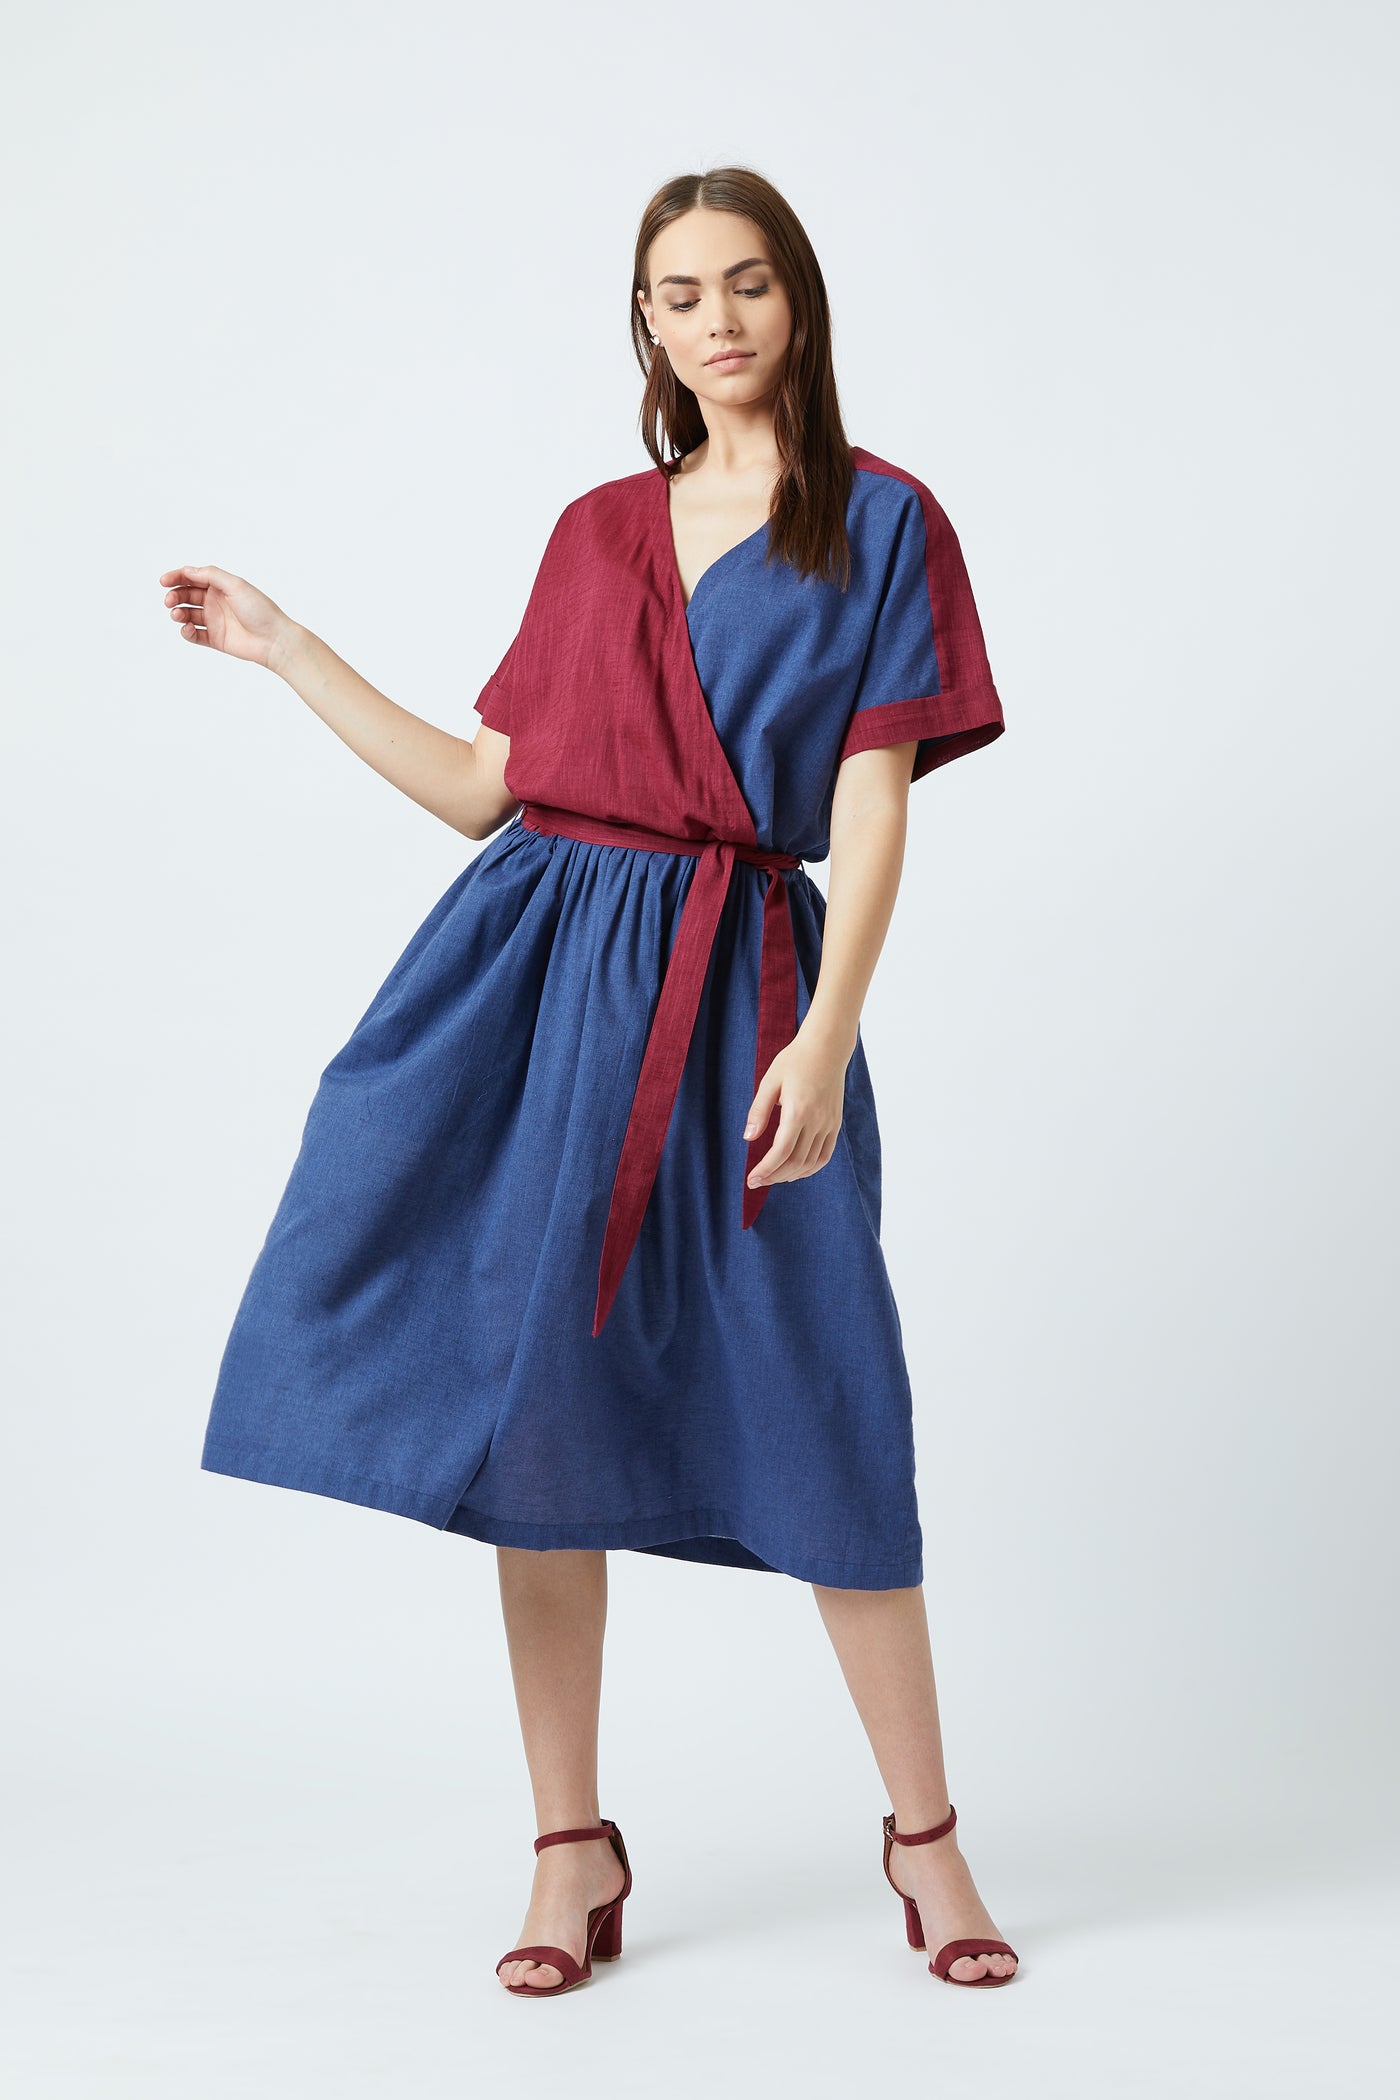 A blue oversized dress which is structured at the waist with a belt